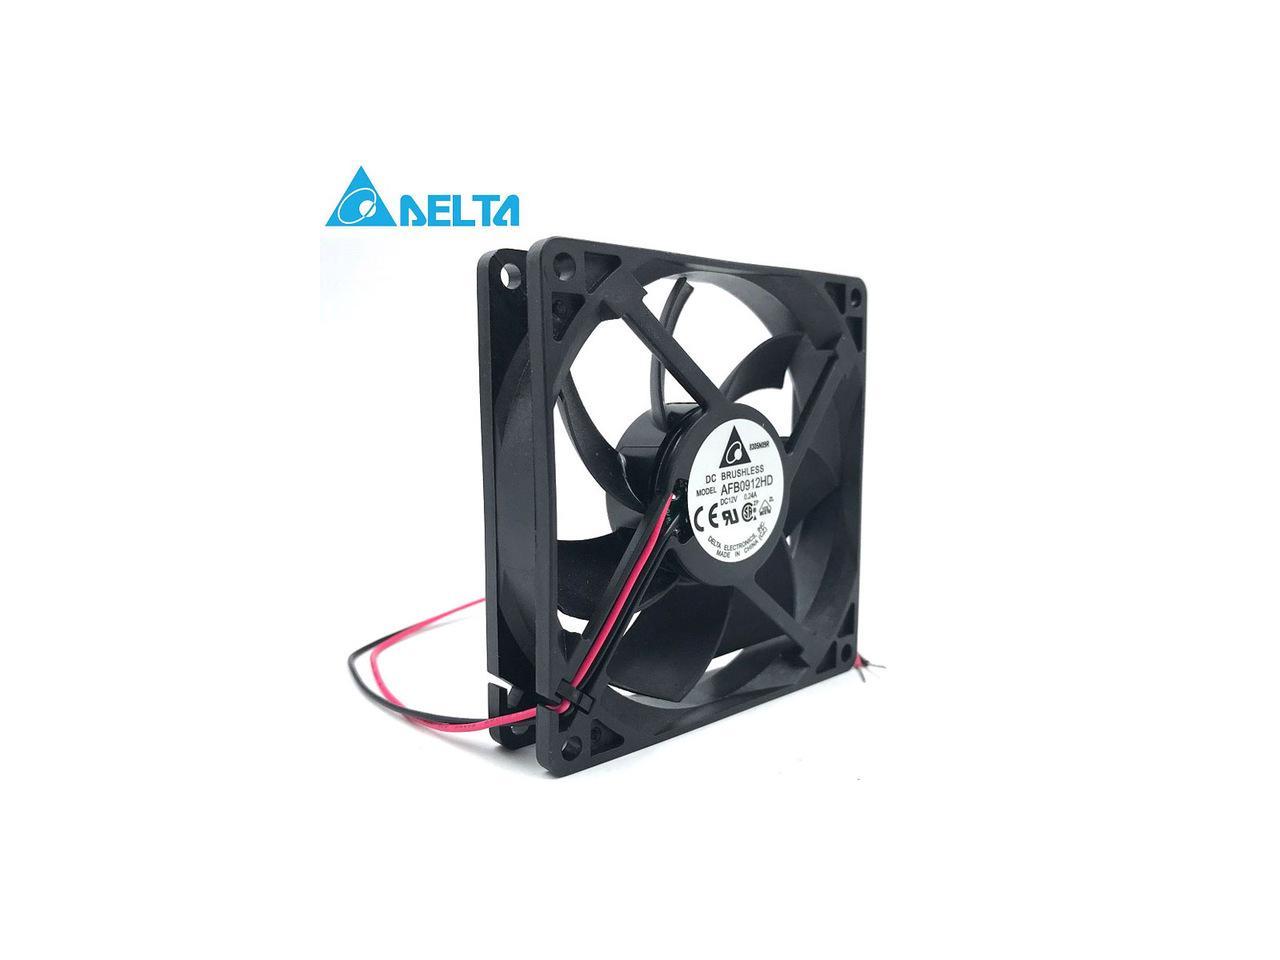 cm 4 pin/line pwm Temperature Control Speed Double Ball CPU Cooling Chassis Fan for Delta 9020 9cm